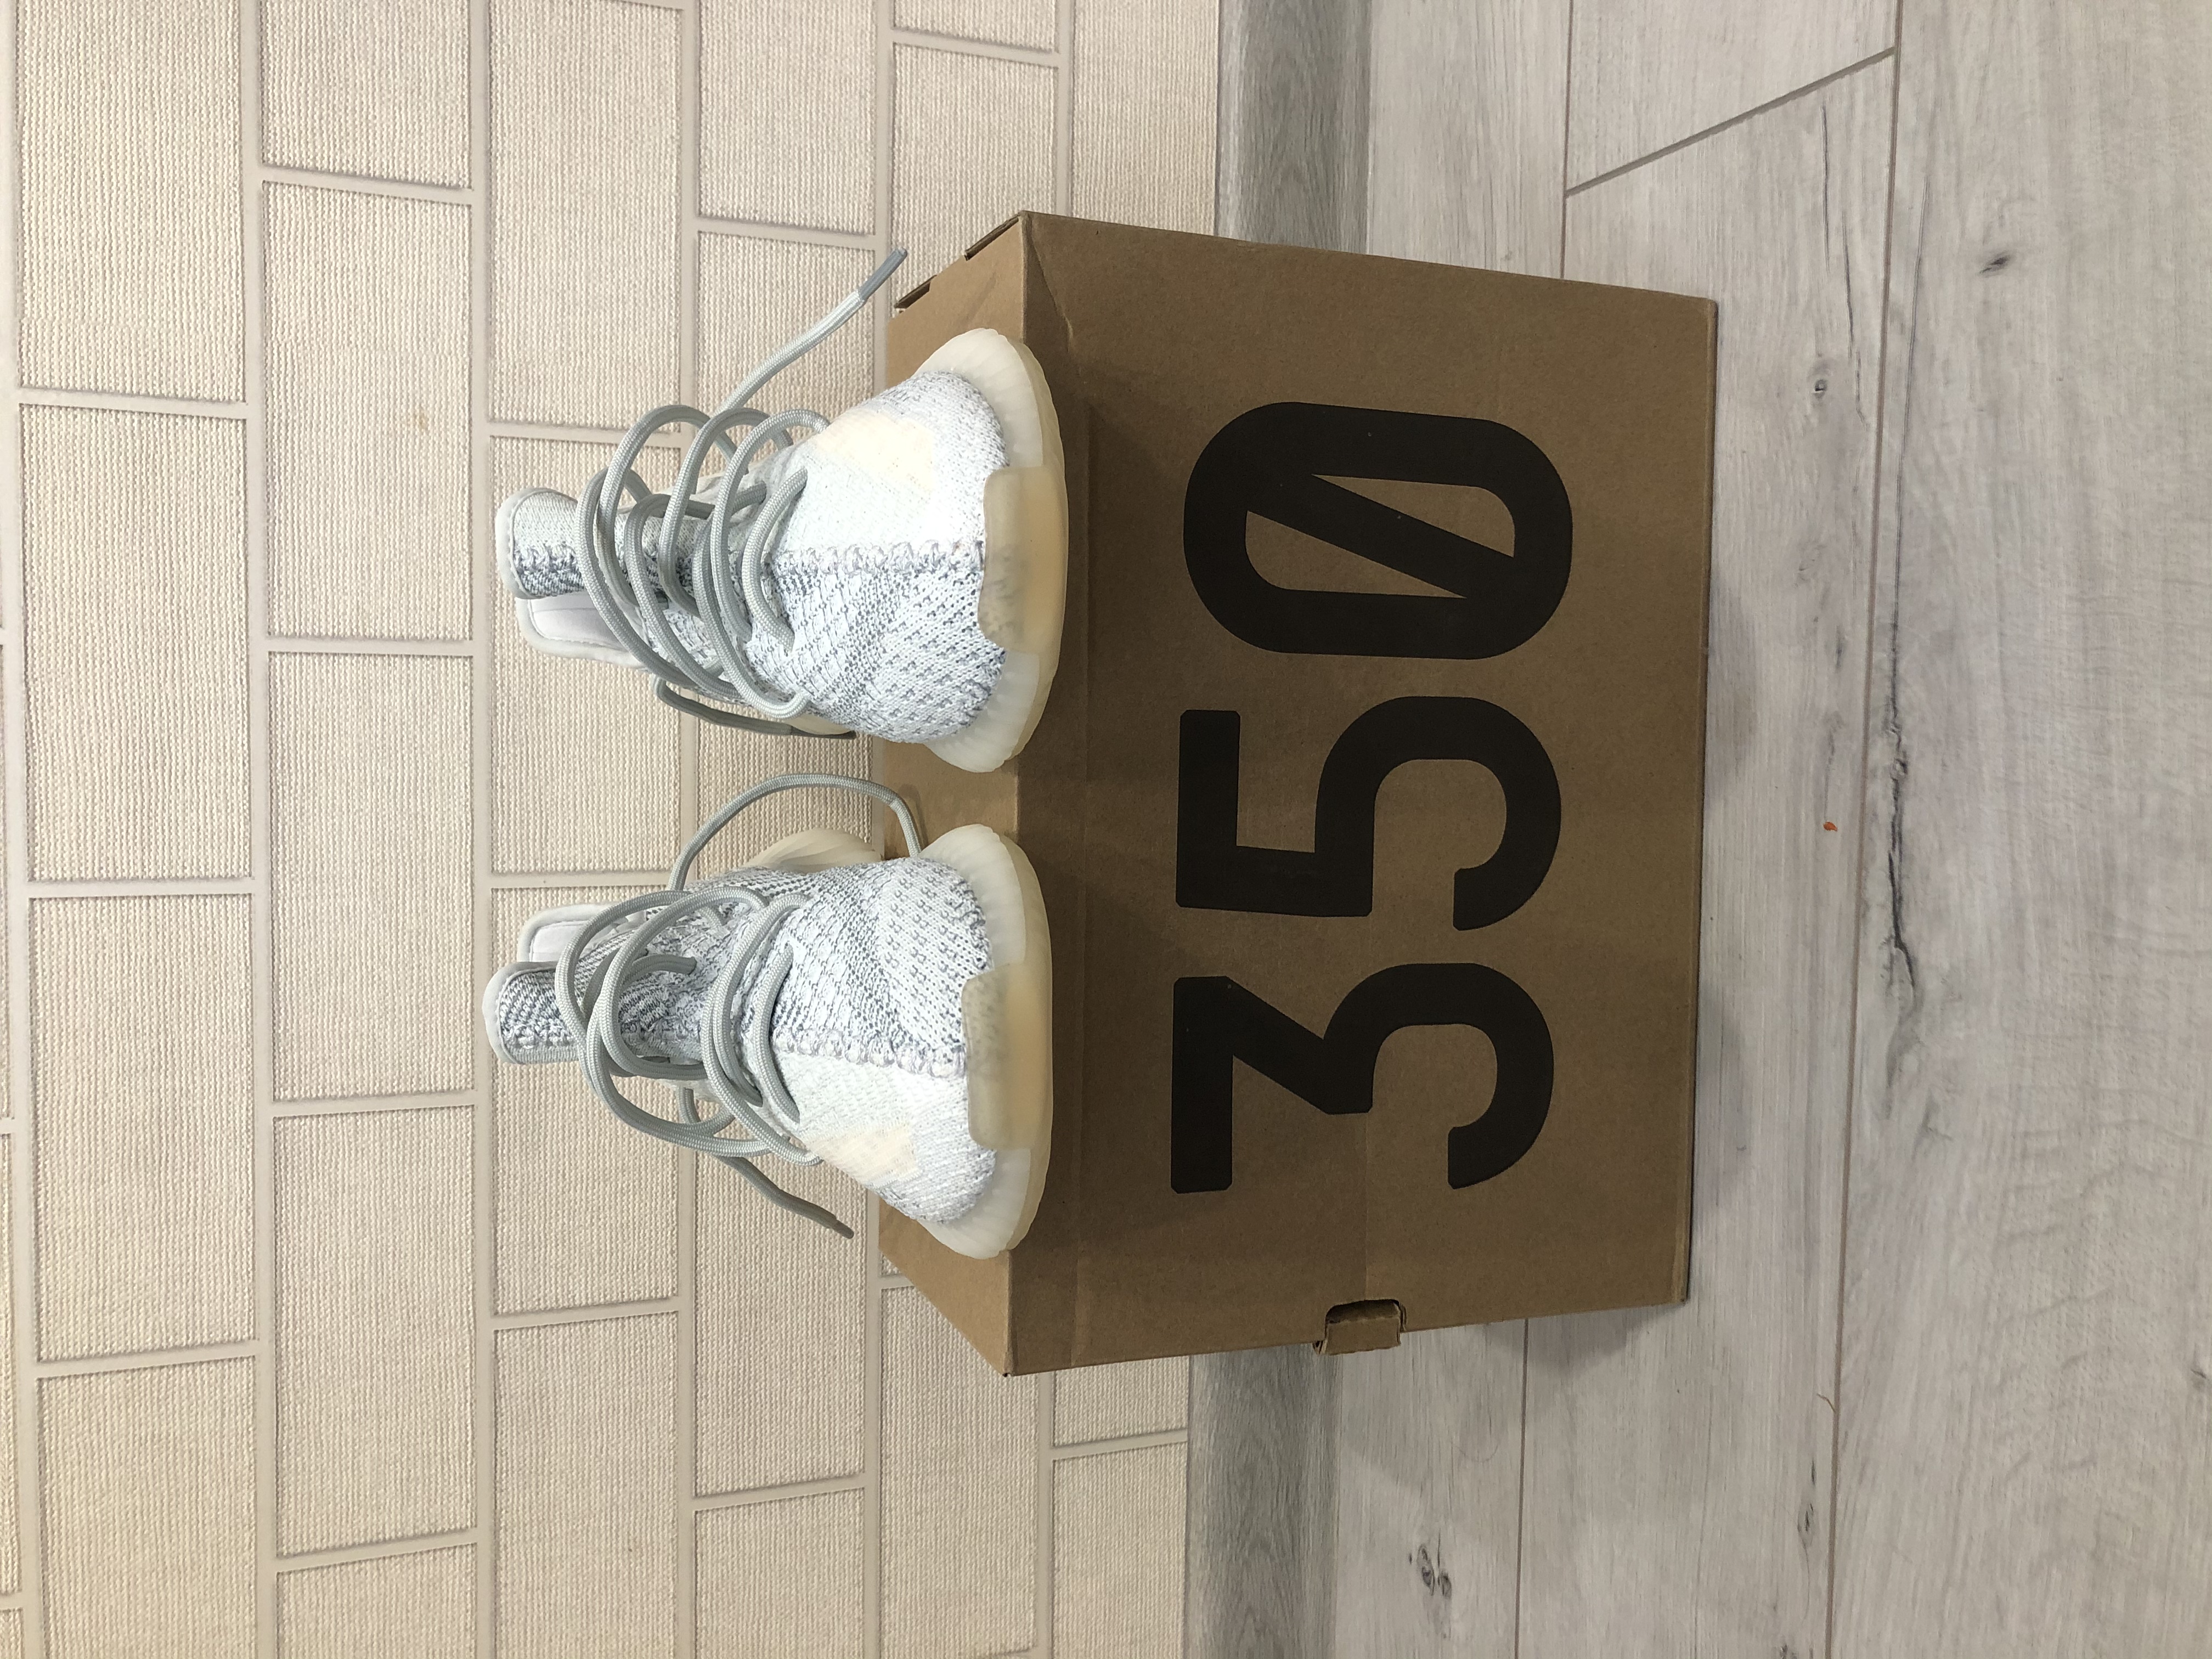 Adidas Yeezy Boost cloud white(reflective)